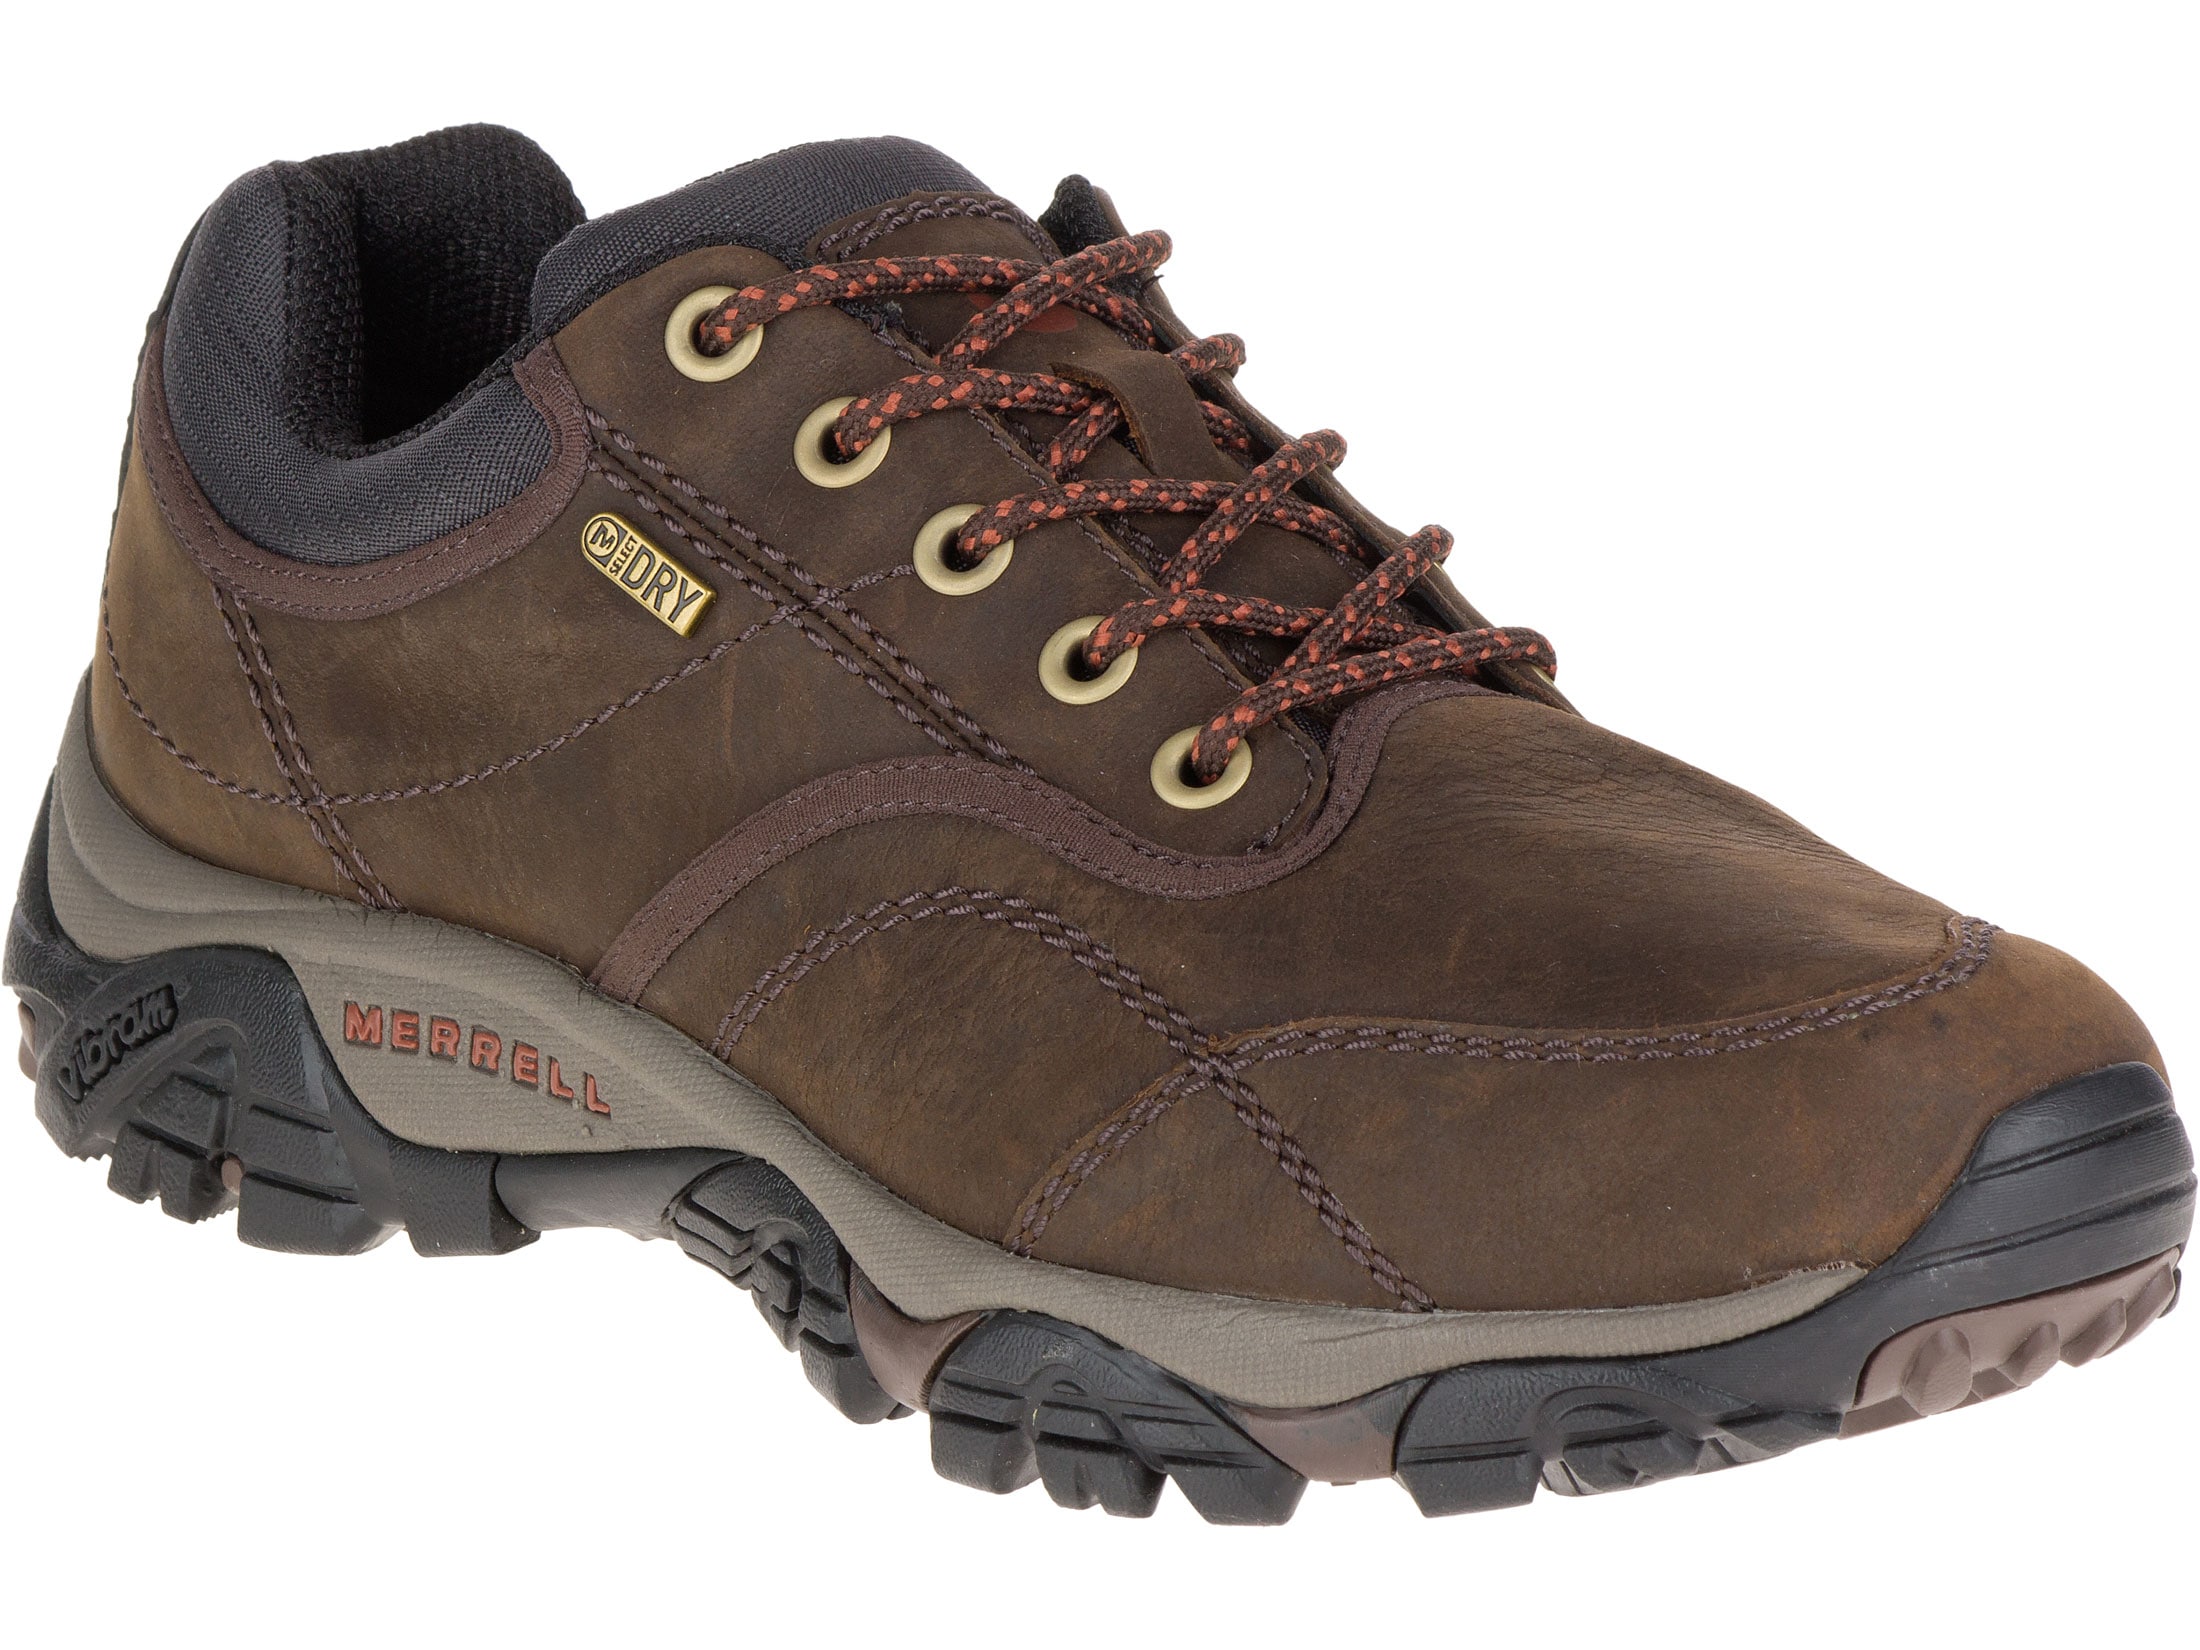 Merrell Moab Rover Low 4 Waterproof Hiking Shoes Leather Espresso